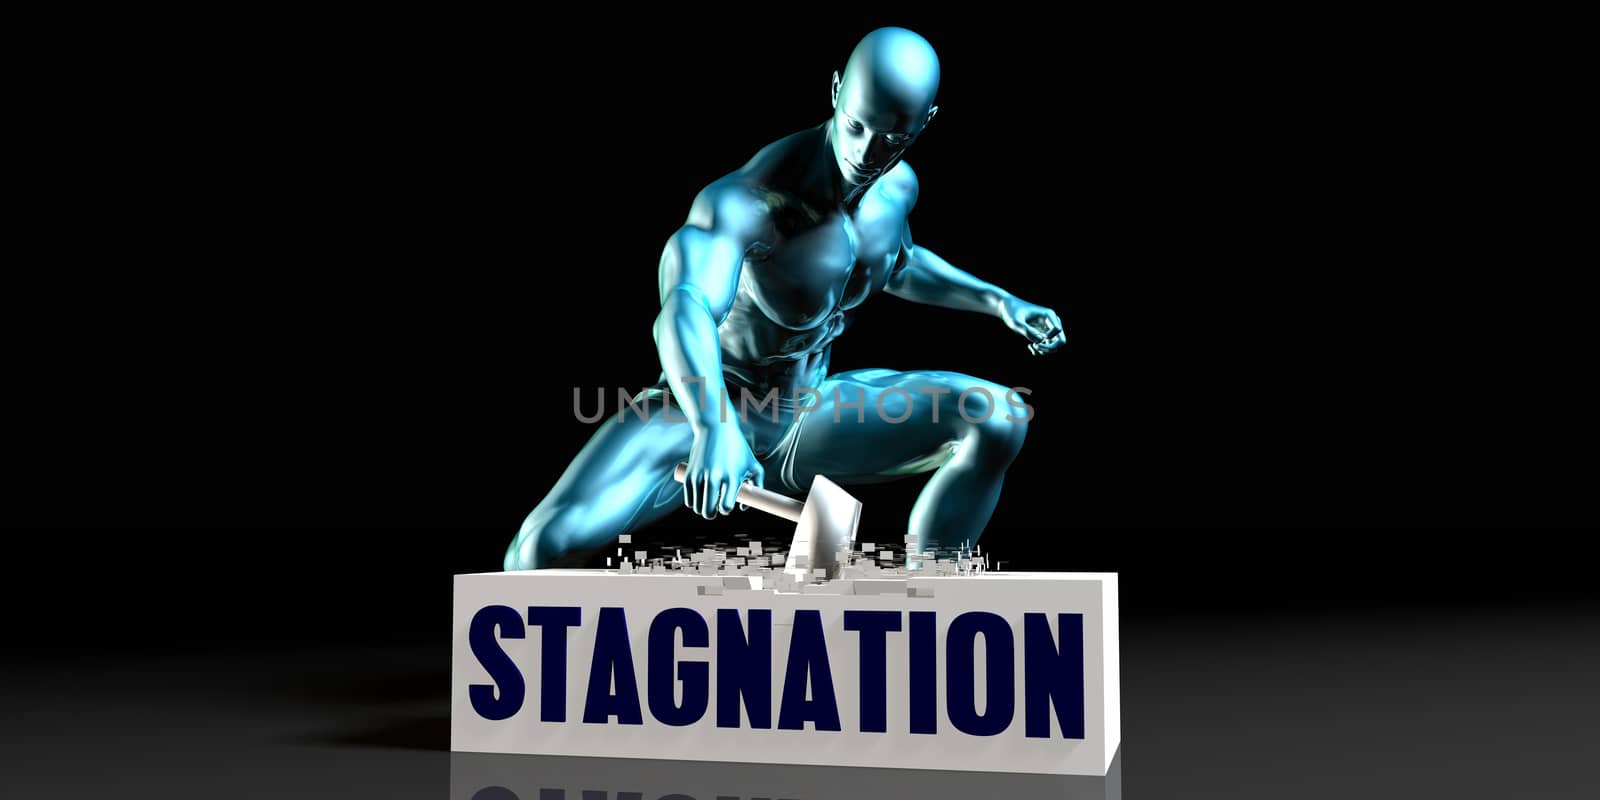 Get Rid of Stagnation and Remove the Problem